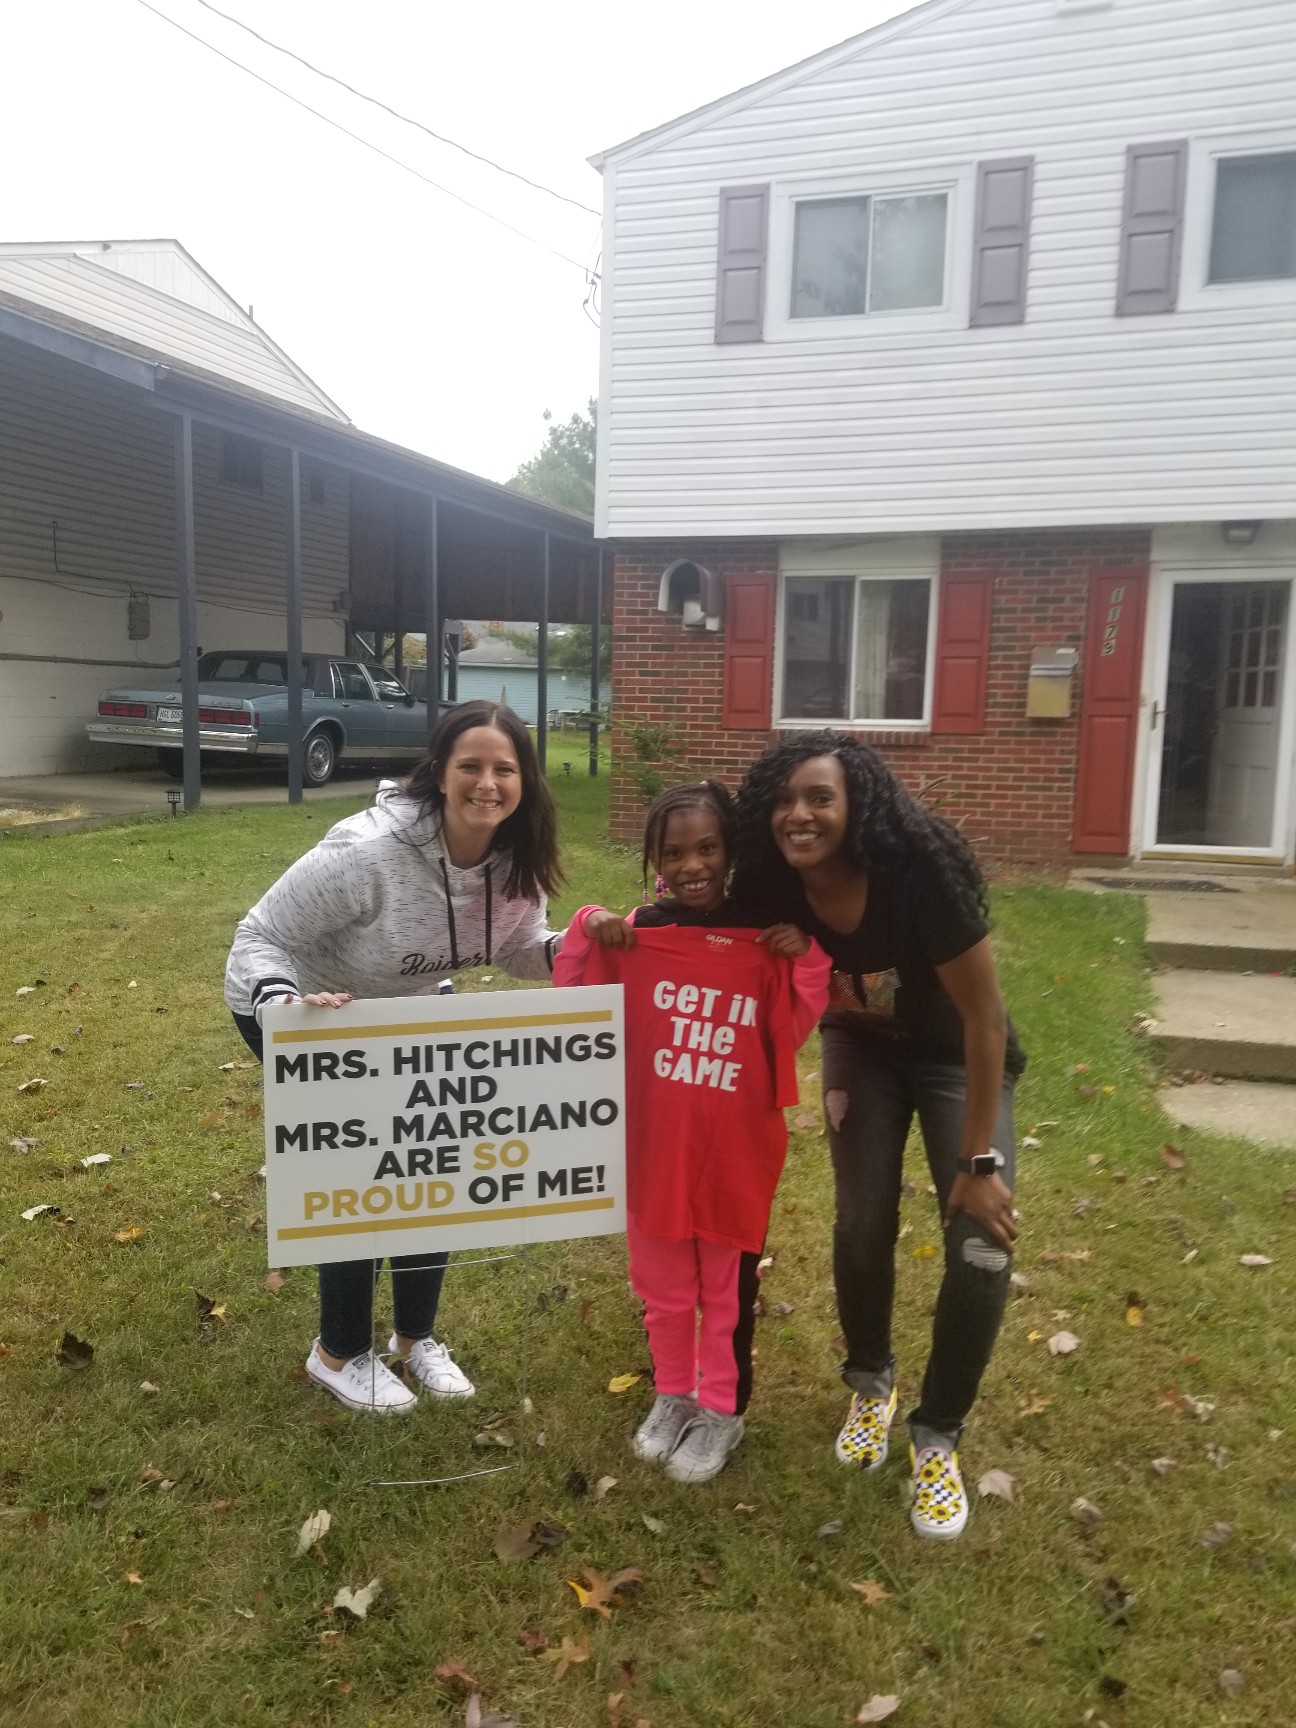 Students Receive Yard Sign from their Teachers